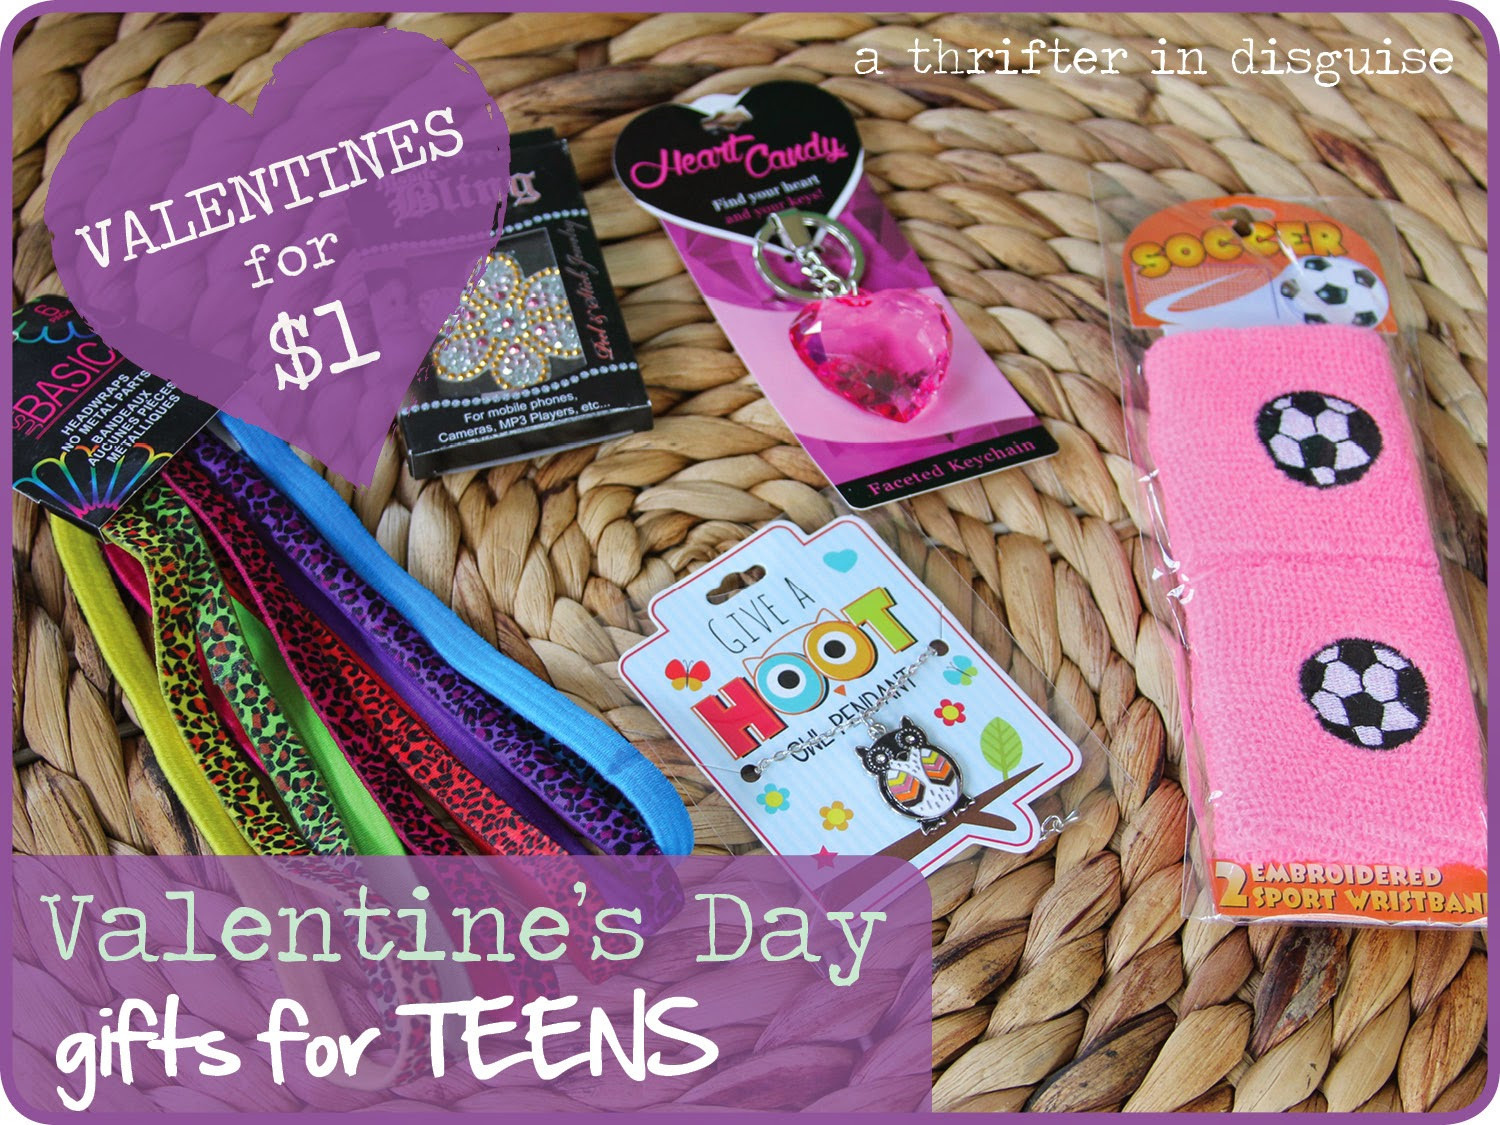 Teenage Valentines Day Ideas
 A Thrifter in Disguise More $1 Valentine s Day Gifts